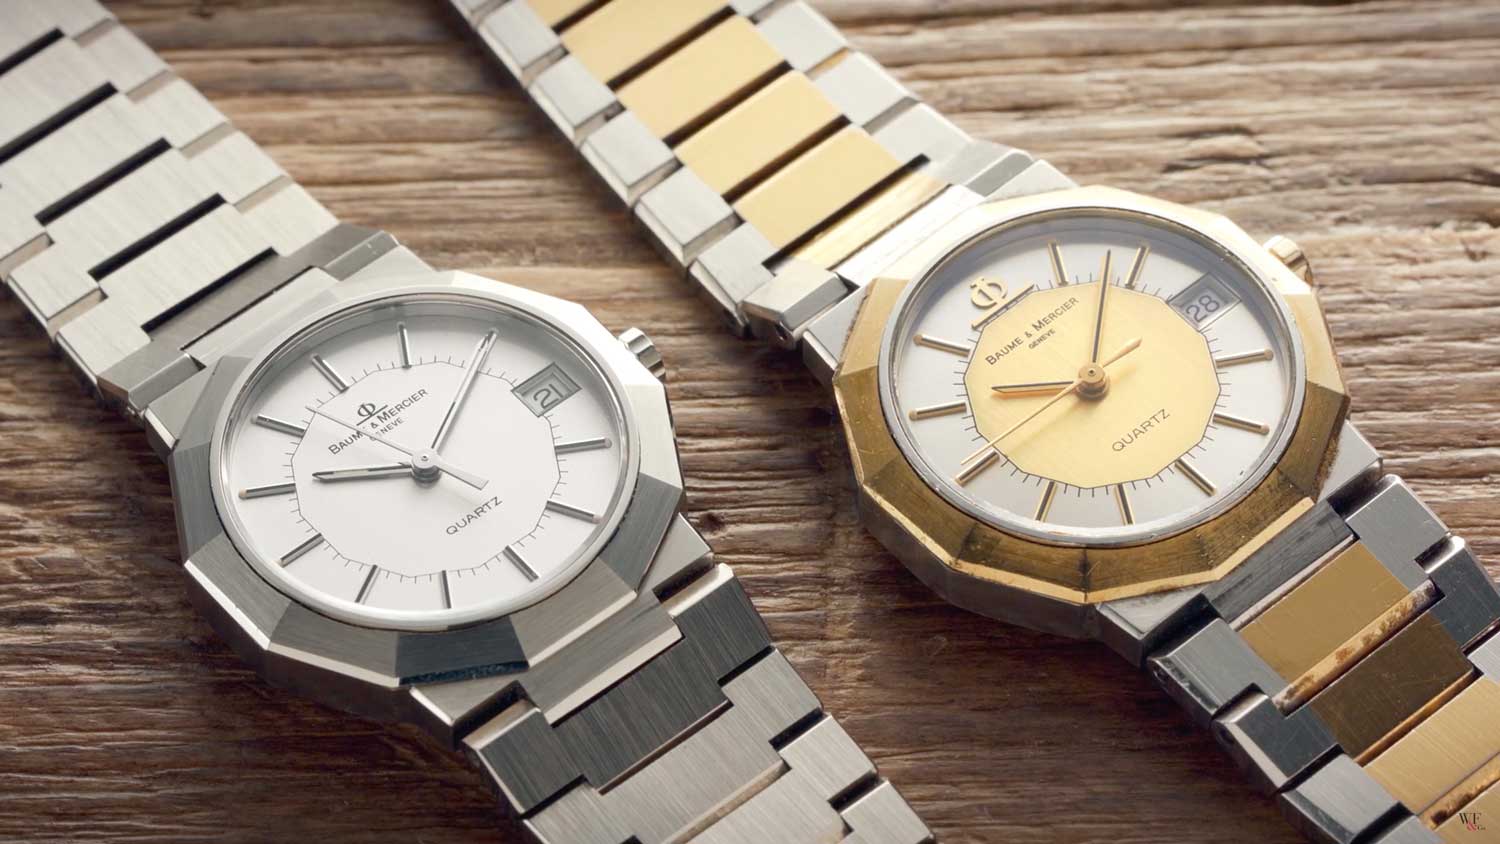 Led by the charge of the 1972 Royal Oak, that ’70s look was quickly mimicked by brands far and wide